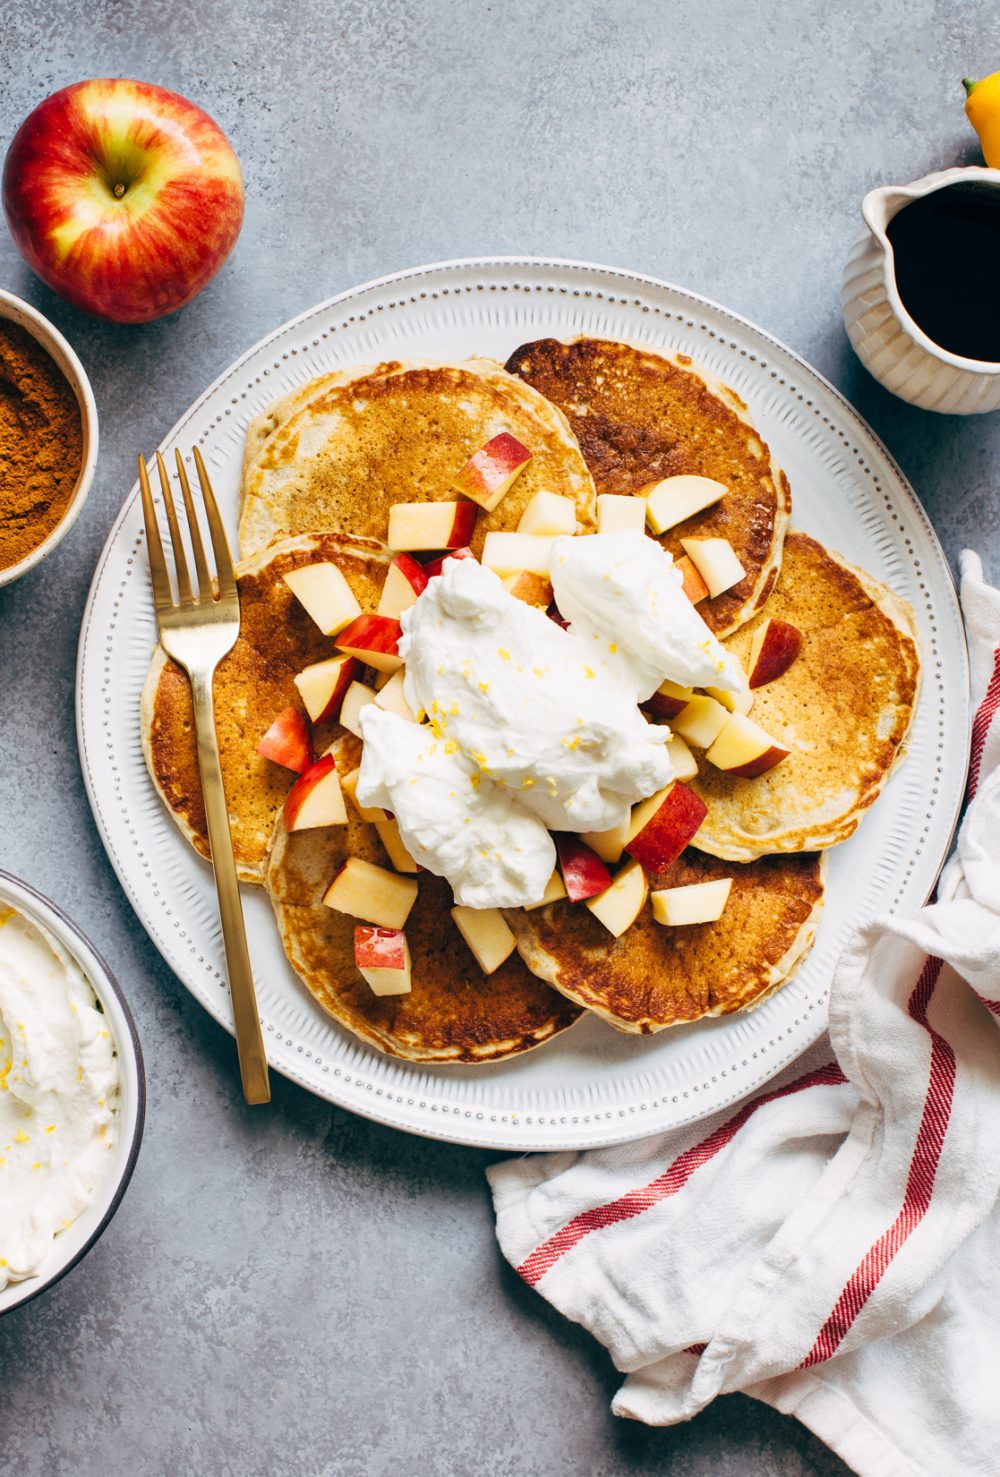 Cinnamon Pancakes with Apples and Meyer Lemon Whipped Cream